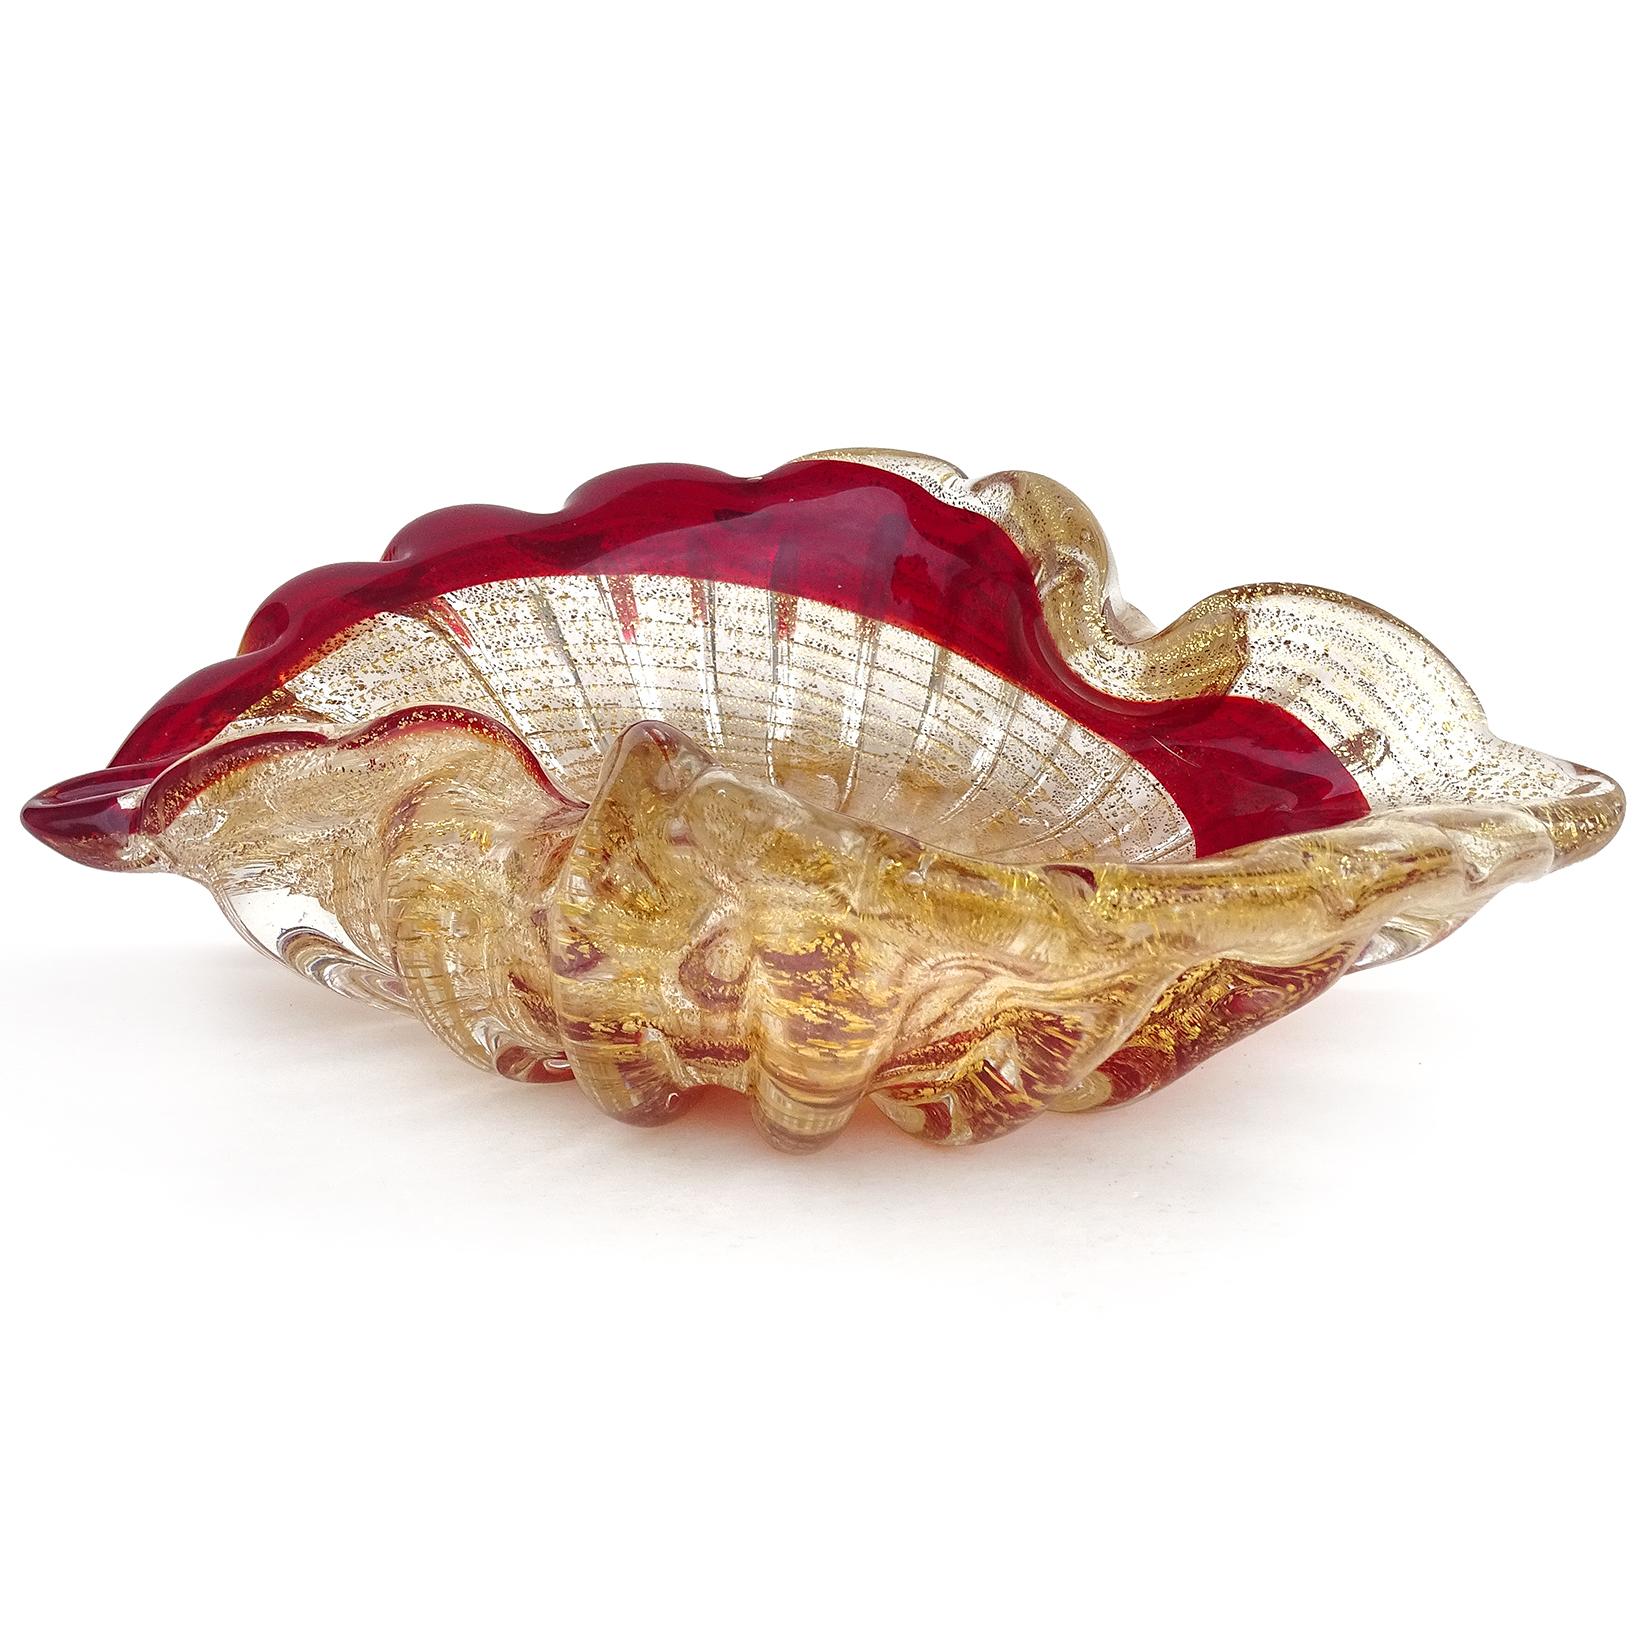 Beautiful vintage Murano hand blown red, with gold flecks Italian art glass bowl. The bowl has a painterly swirl, ribbed pattern along the outside, and is profusely covered in gold leaf. Can be used as a display piece on any table. Created in the